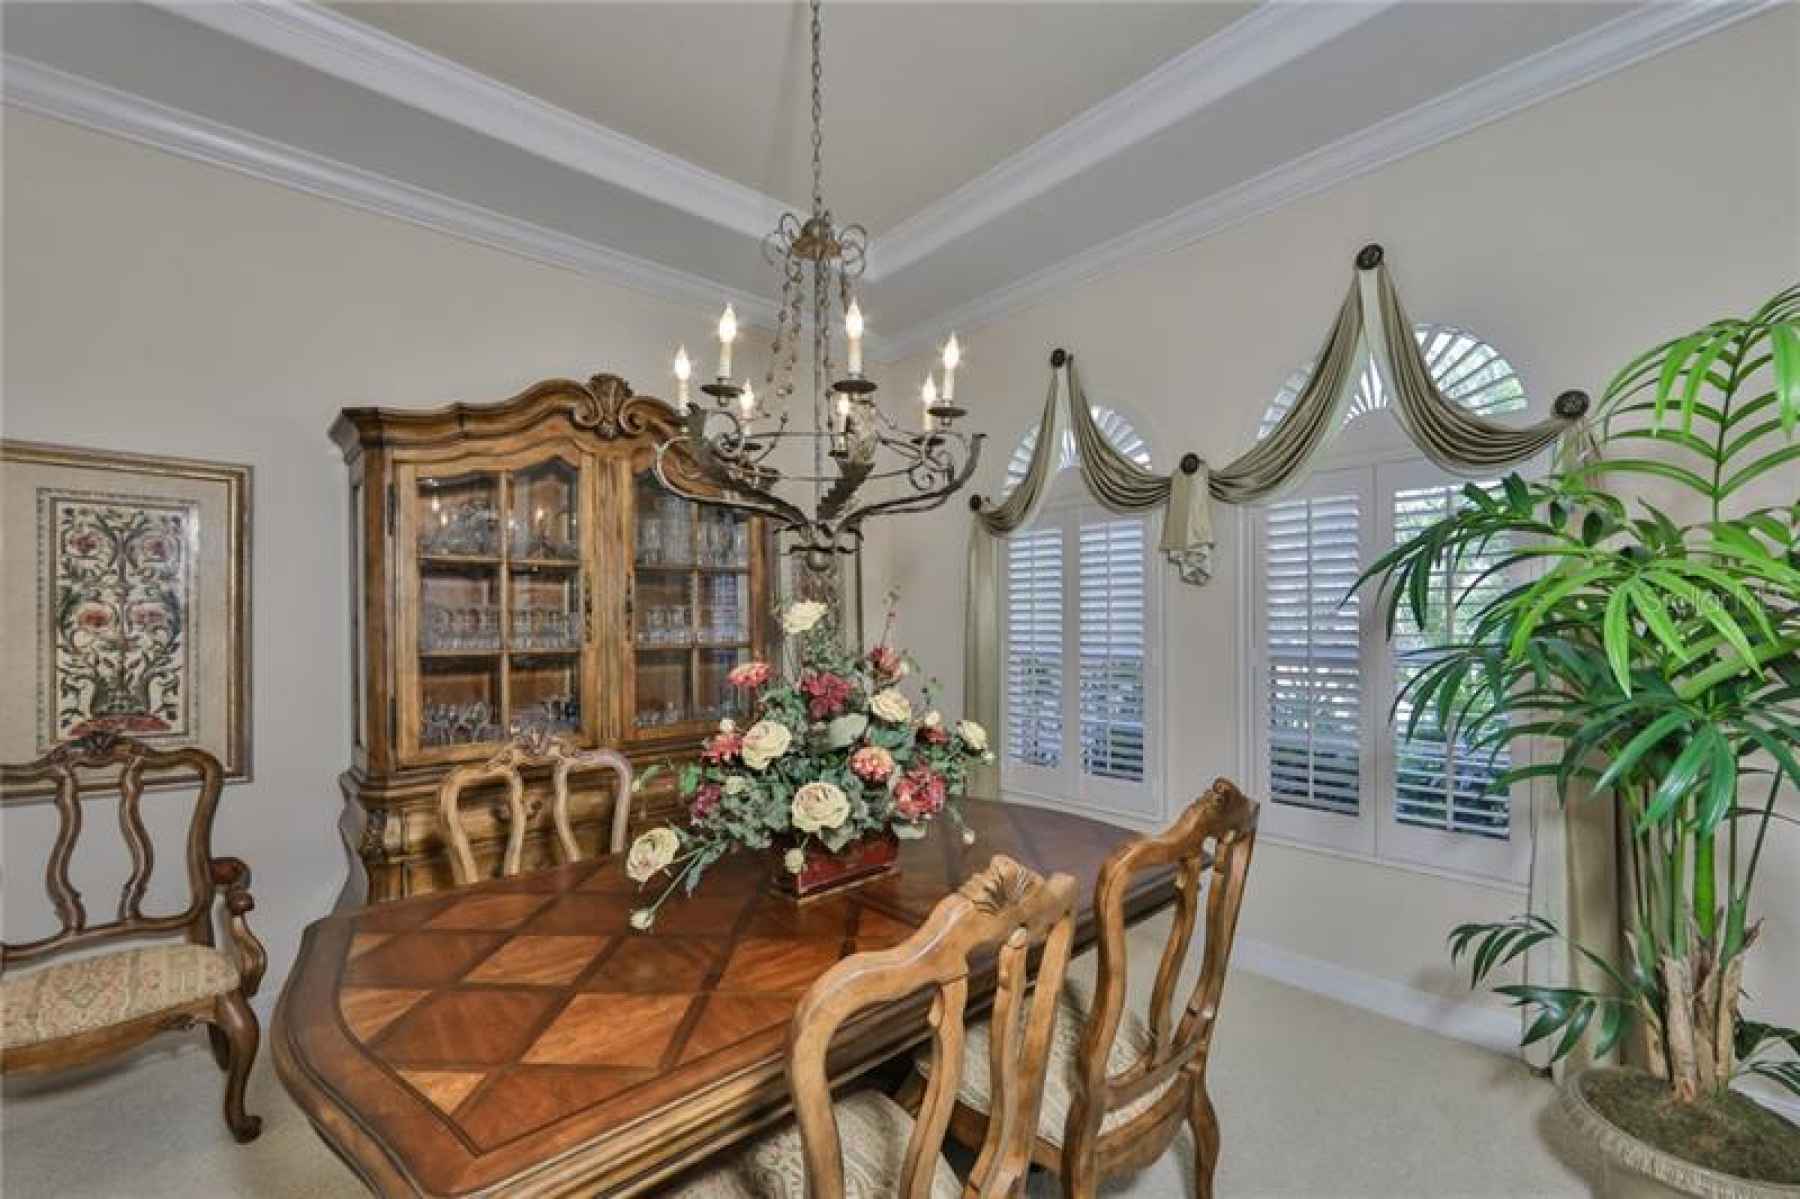 The Dining room boasts of plantation shutters, crown molding and a tray ceiling.